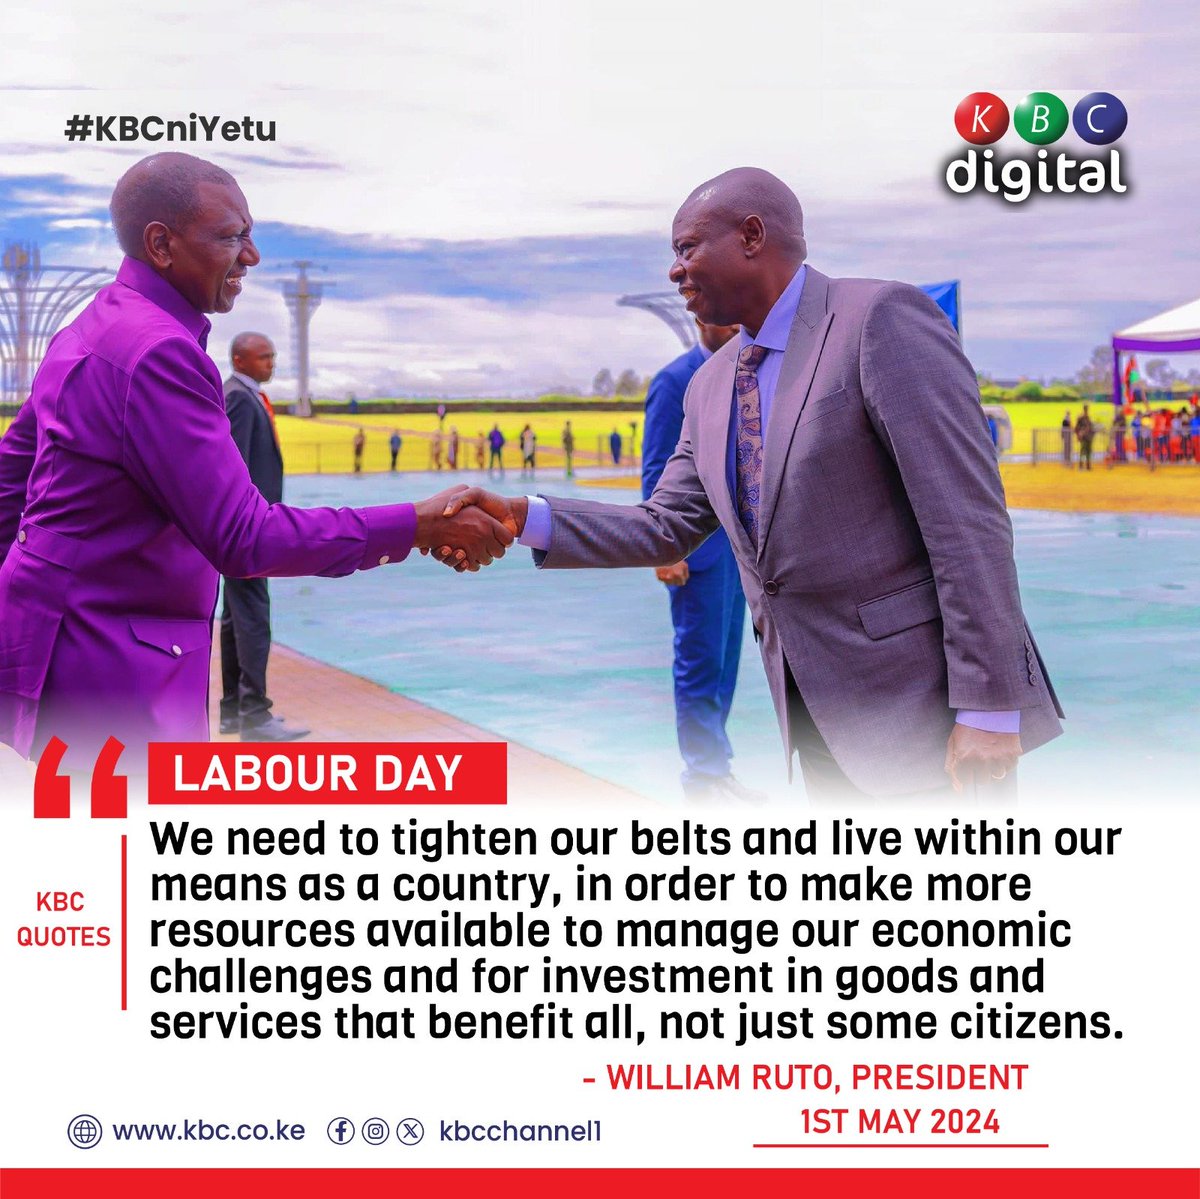 ‘We need to tighten our belts and live within our means as a country, in order to make more resources available to manage our economic challenges and for investment in goods and services that benefit all, not just some citizens.’
- William Ruto, President
#KBCniYetu ^RO